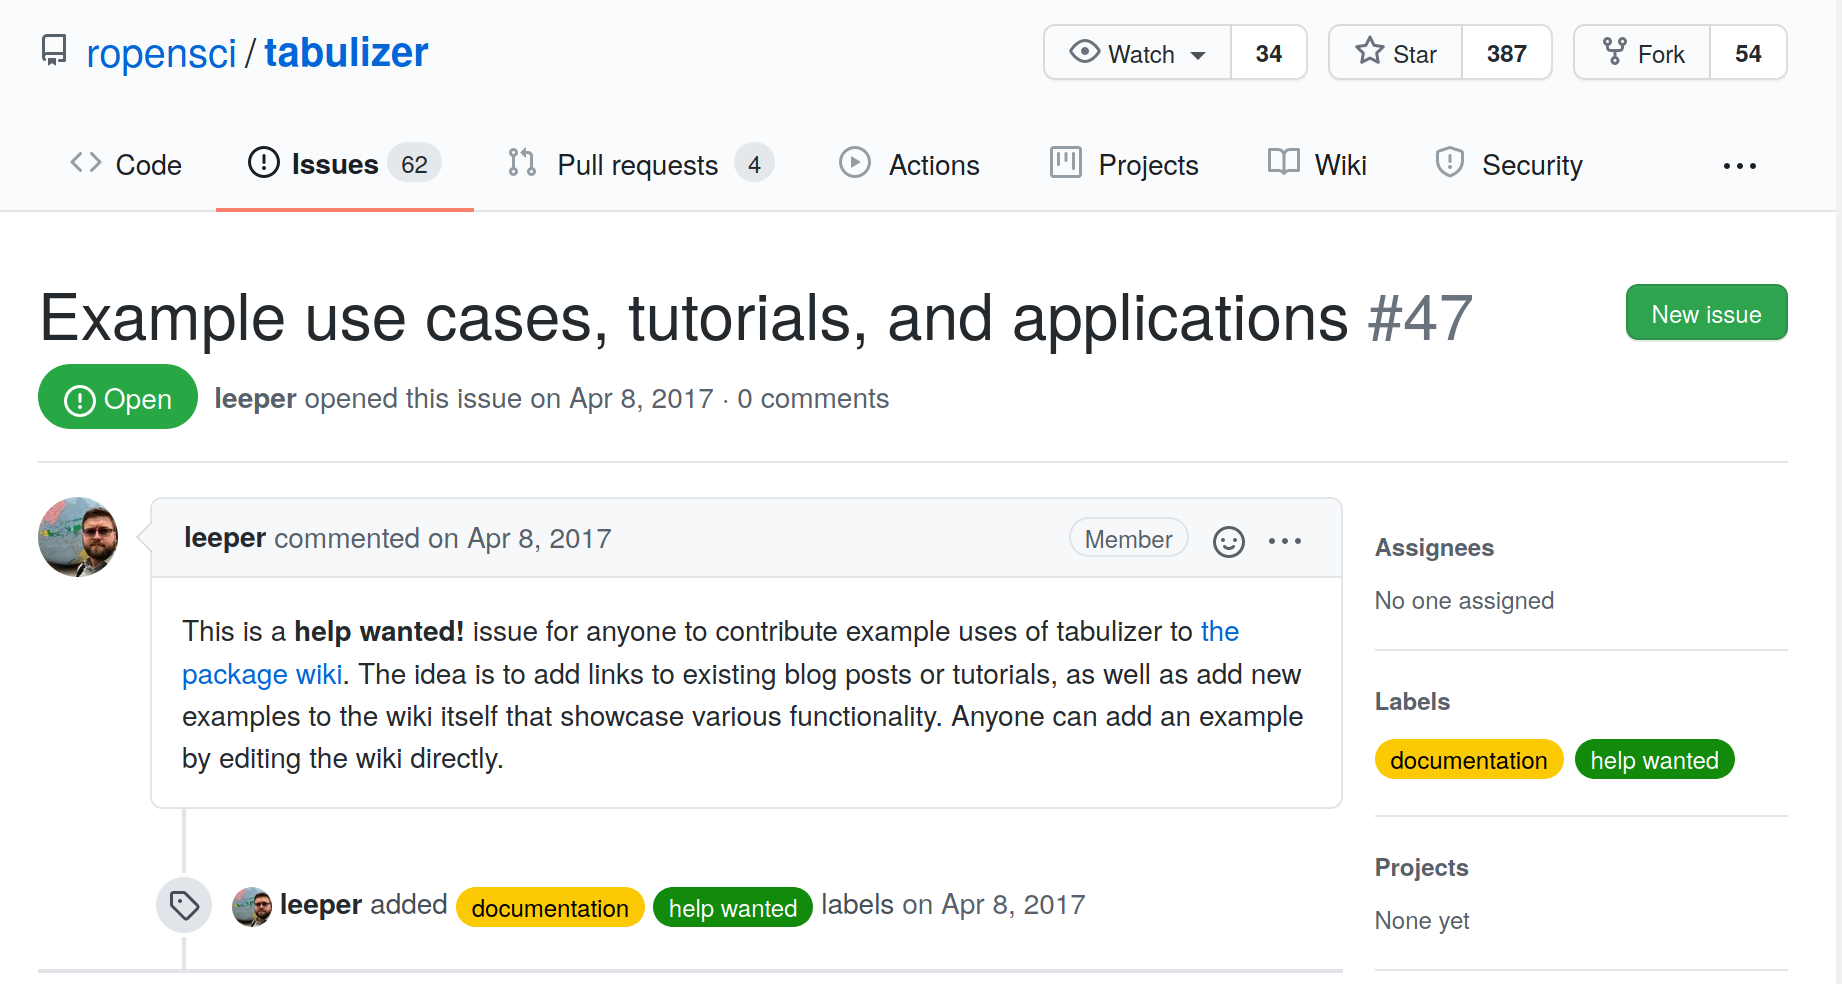 Screenshot of a Non-coding 'help wanted' issue called 'Example use cases, tutorials, and applications' from the tabulizer package repository on GitHub